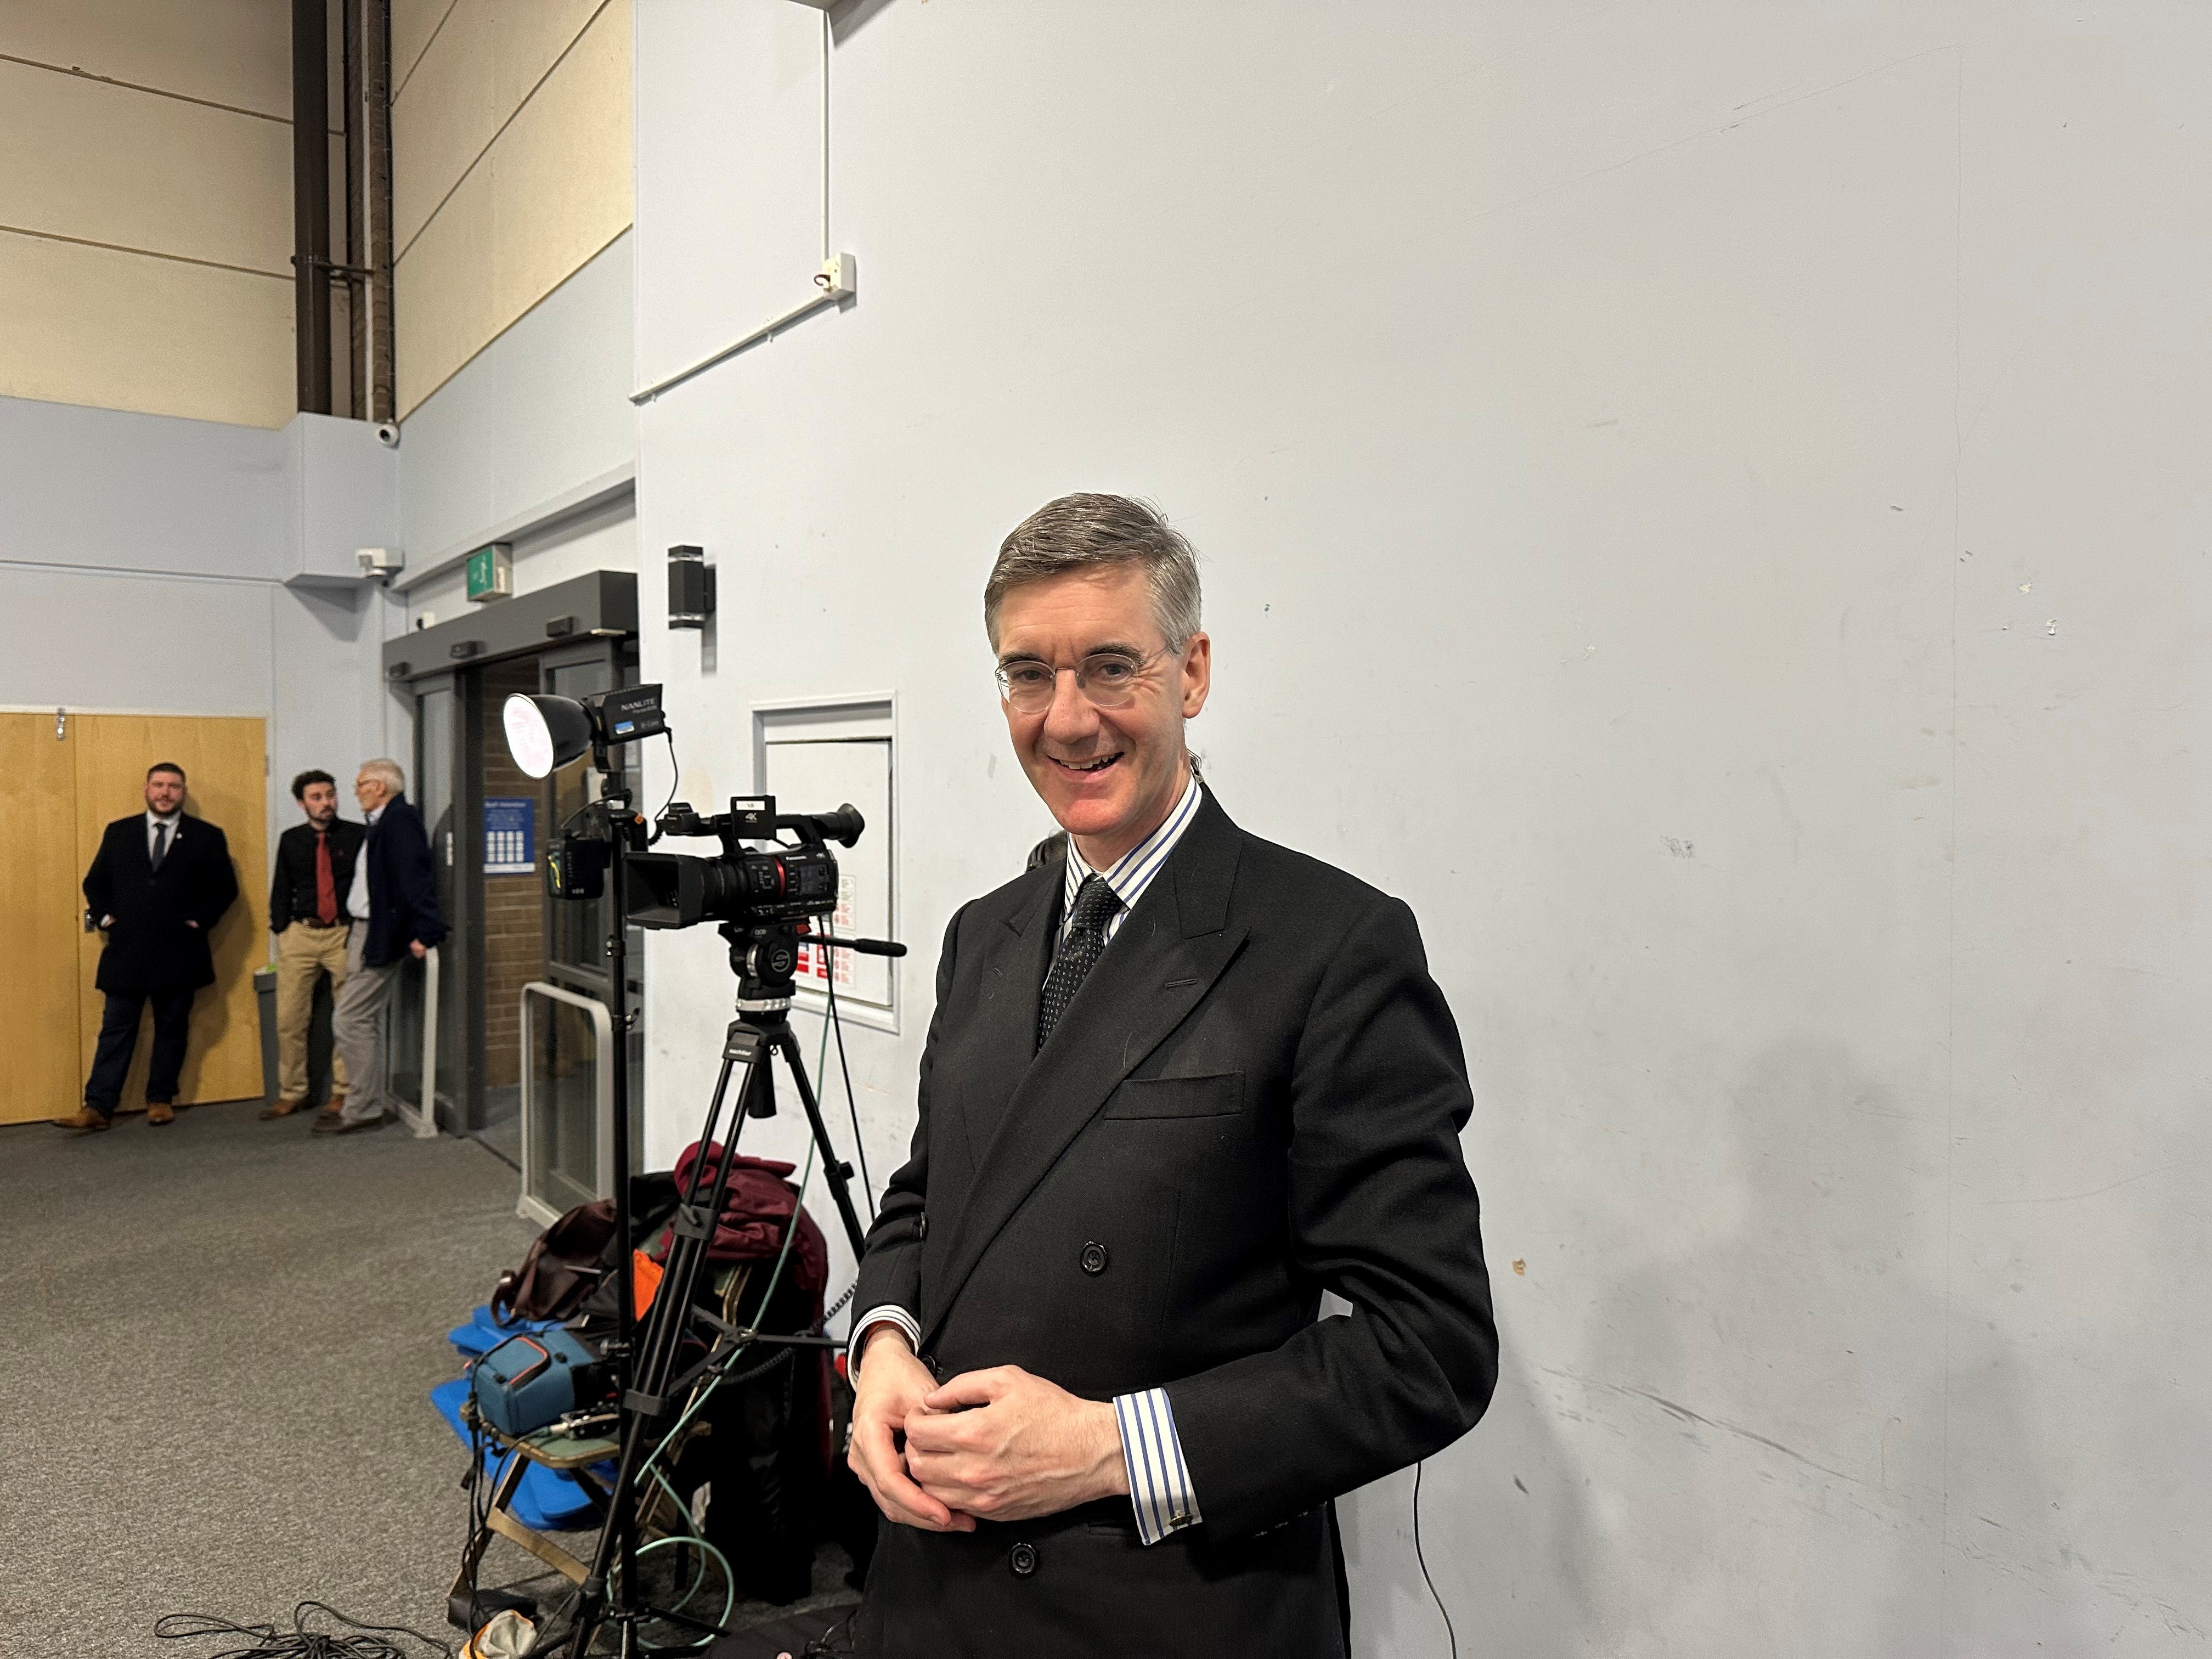 <p>Jacob Rees-Moggs spoke to the media at the Kingswood by-election</p>